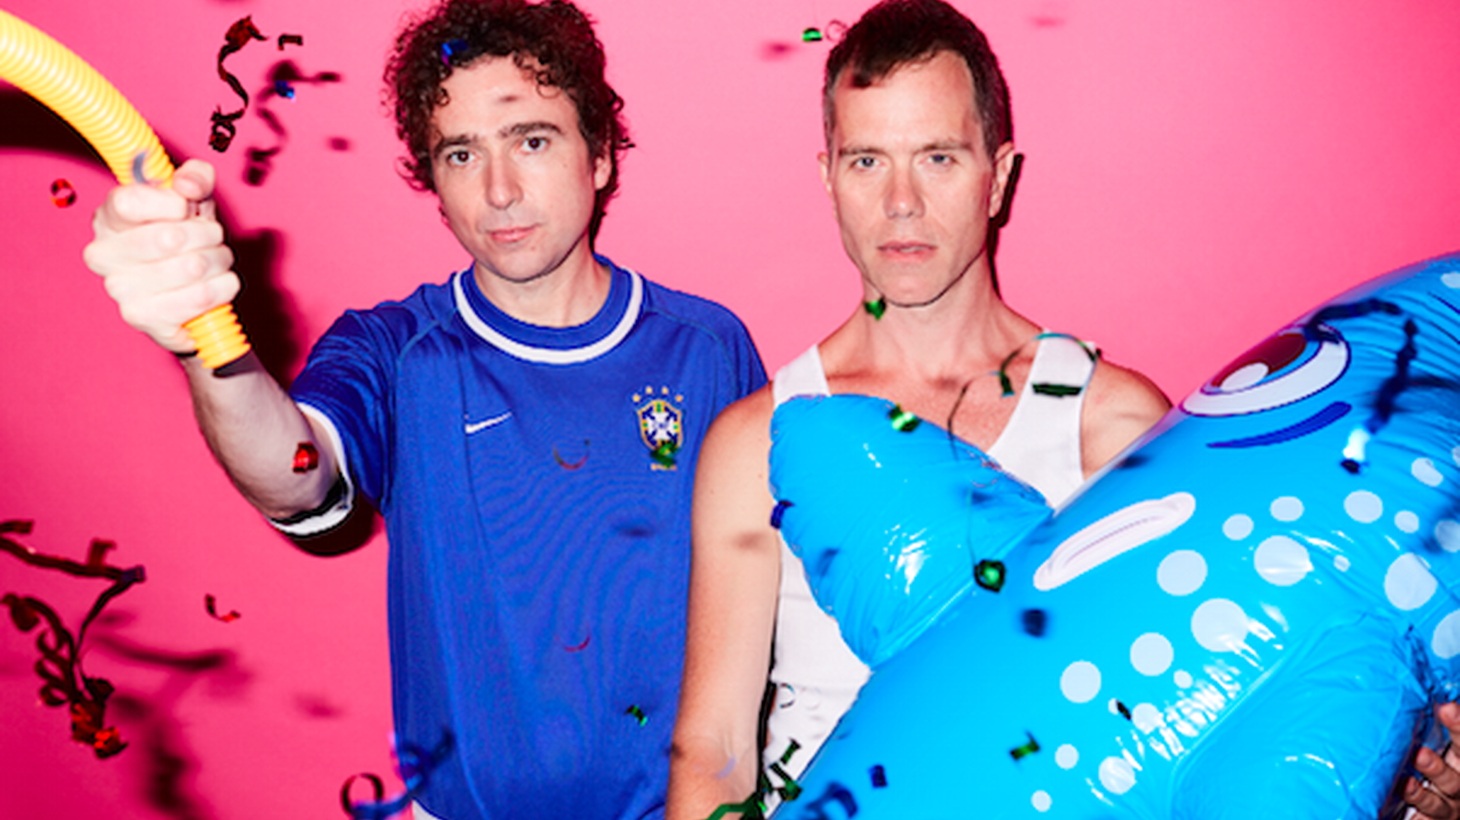 We welcome party starters The Presets into the studio to get our weekend started right! The Aussie electronic music veterans released their long-awaited 4th studio album, HI VIZ, earlier this year and are in the midst of a US tour.